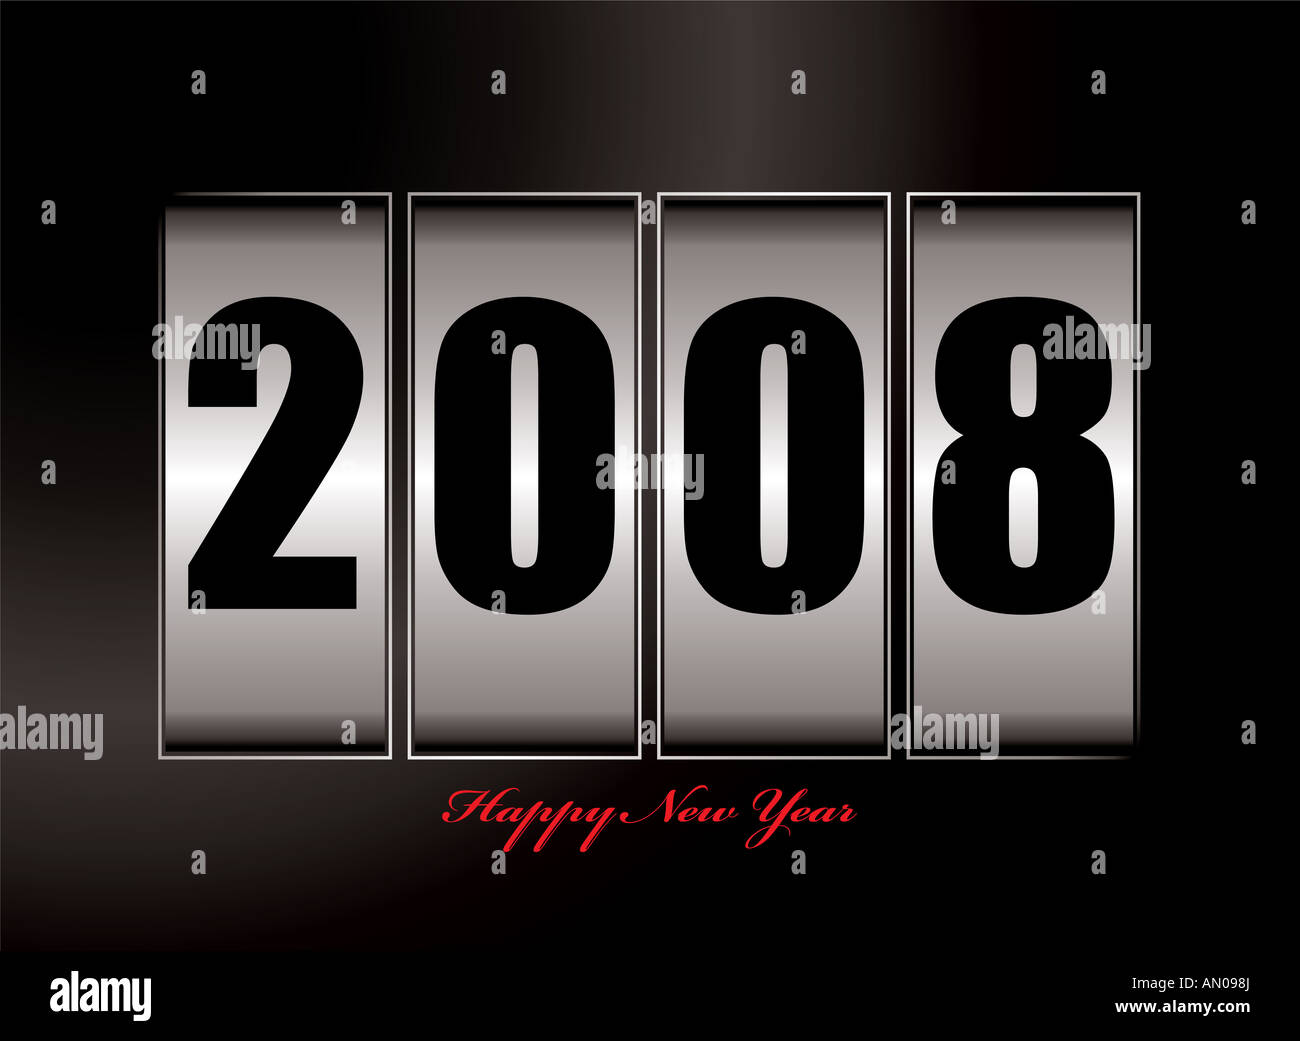 Illustration of 2008 image with new year text Stock Photo